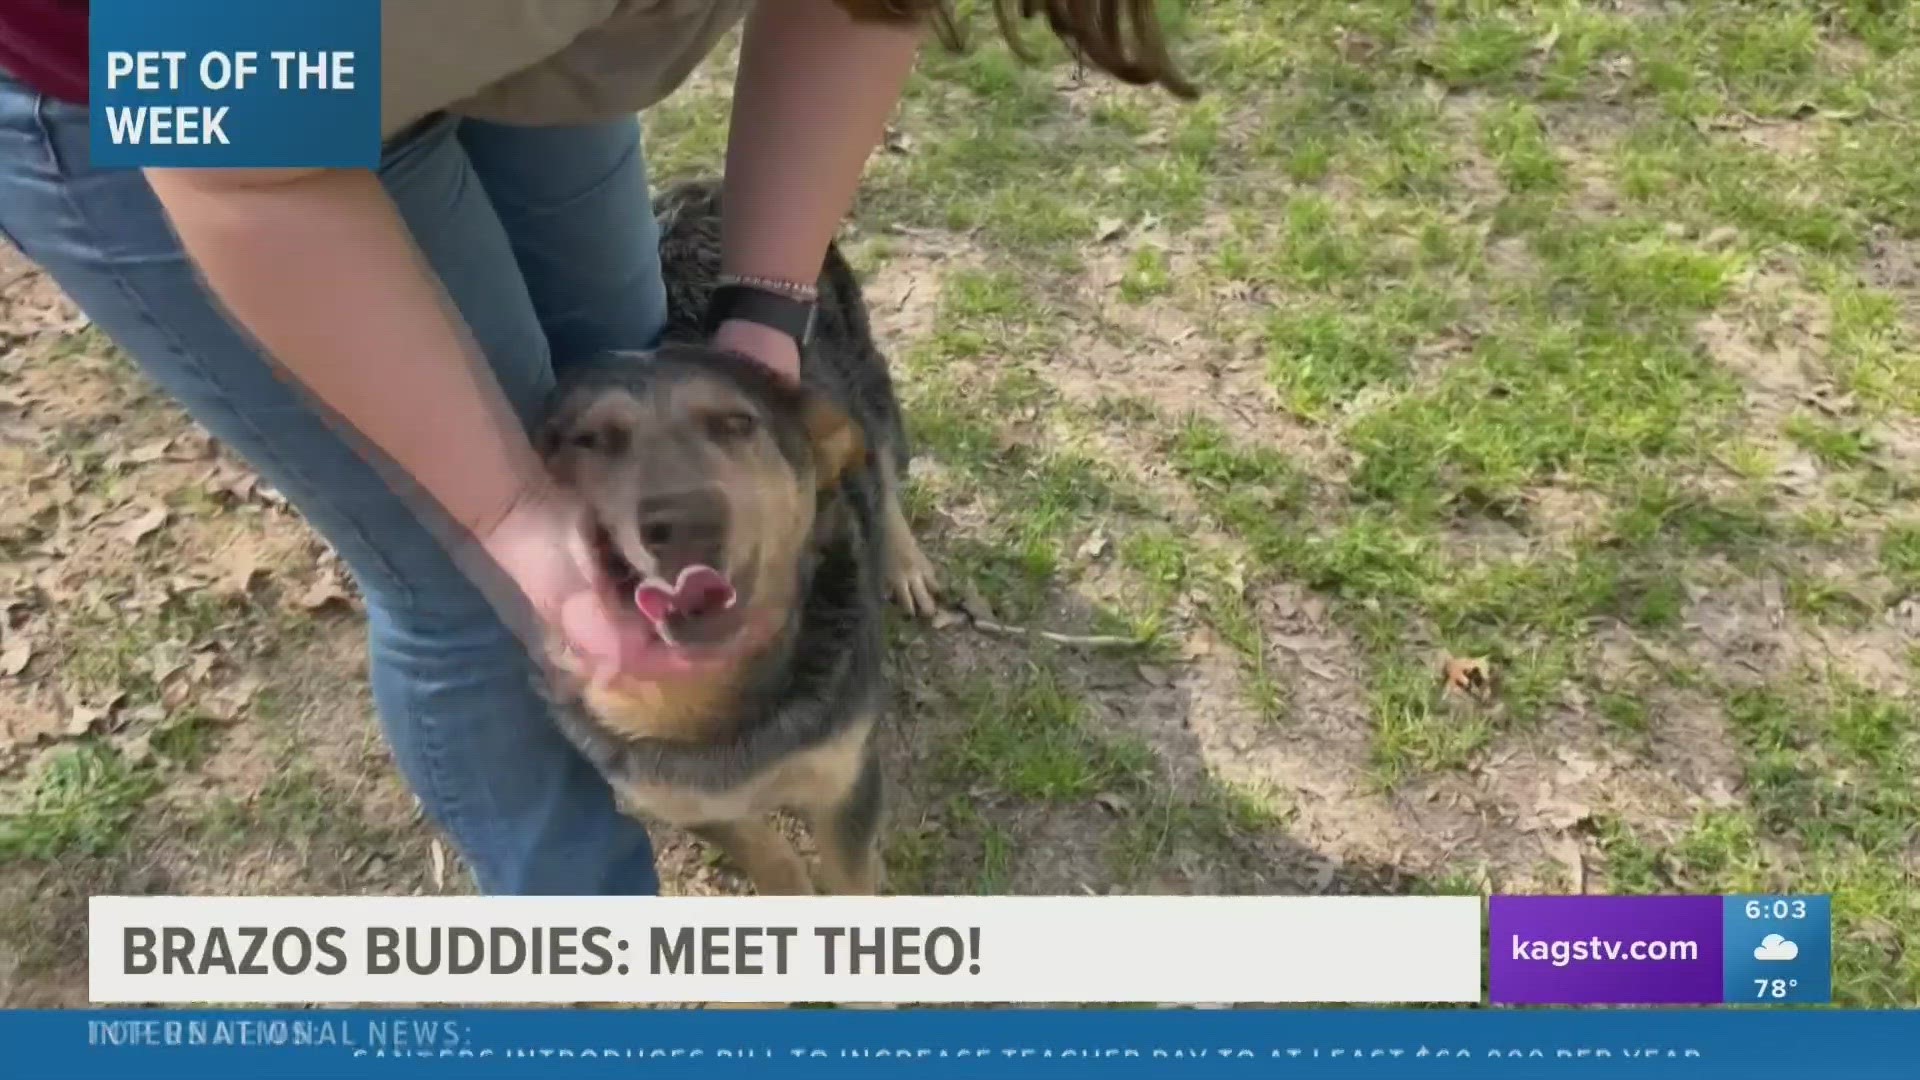 This week's featured Brazos Buddy is Theo, a two-and-a-half-year-old Cattle Dog mix that's looking to be adopted.